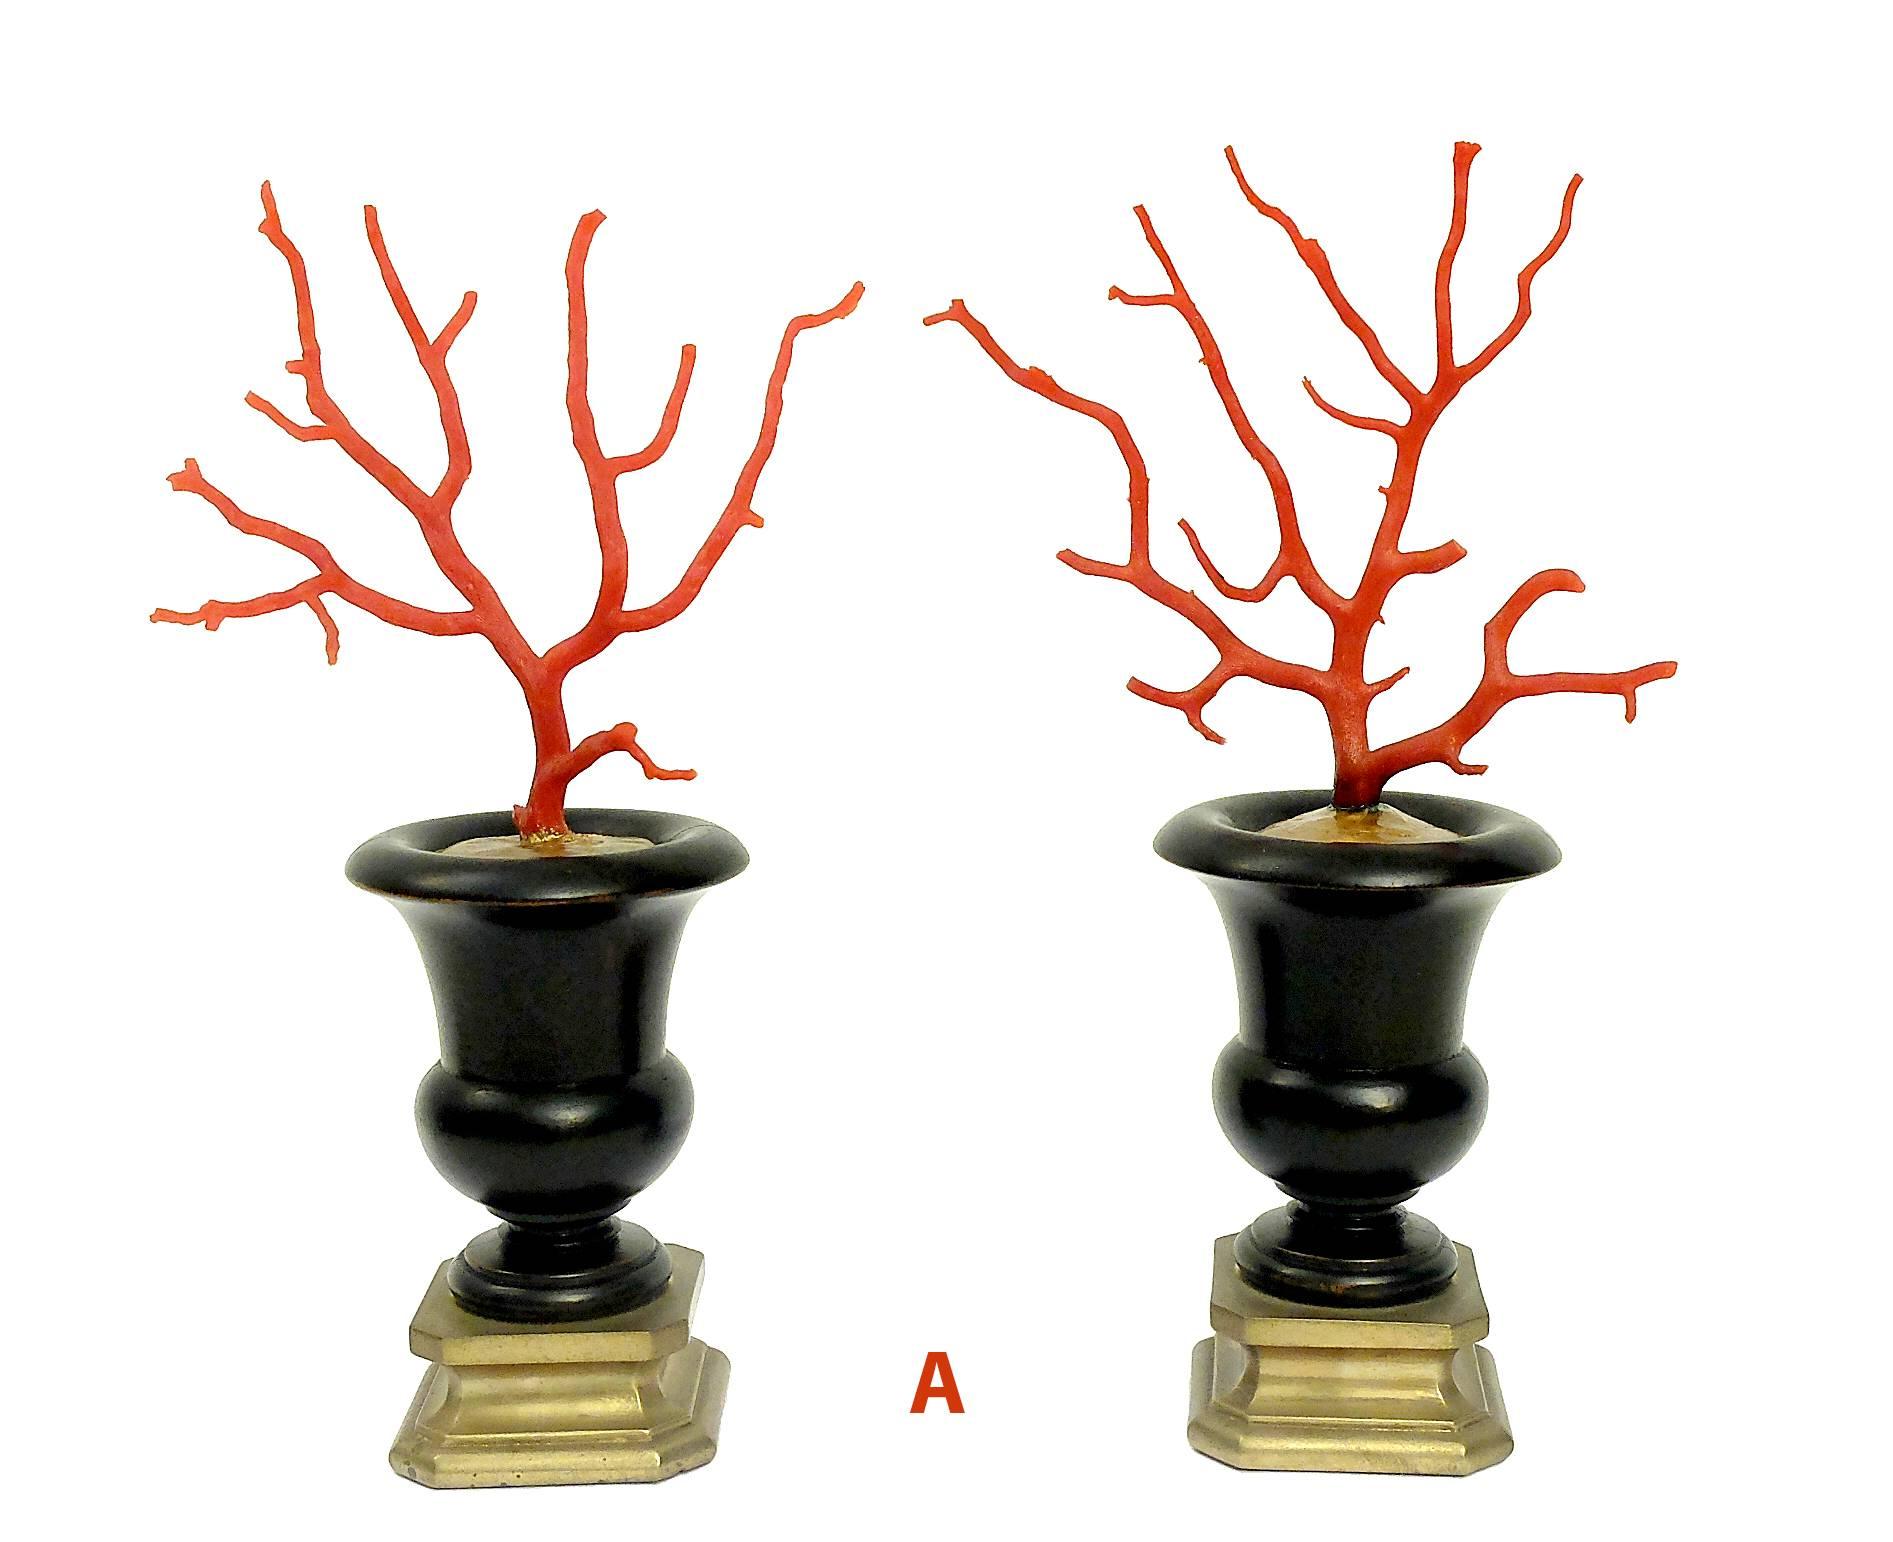 An extraordinary group of naturalia mineral specimen of cut off branches of mediterranean coral, five pairs of branches. Mounted over black painted wooden base with some brass and gold paint finishing. The bases are made of turned walnut wood with